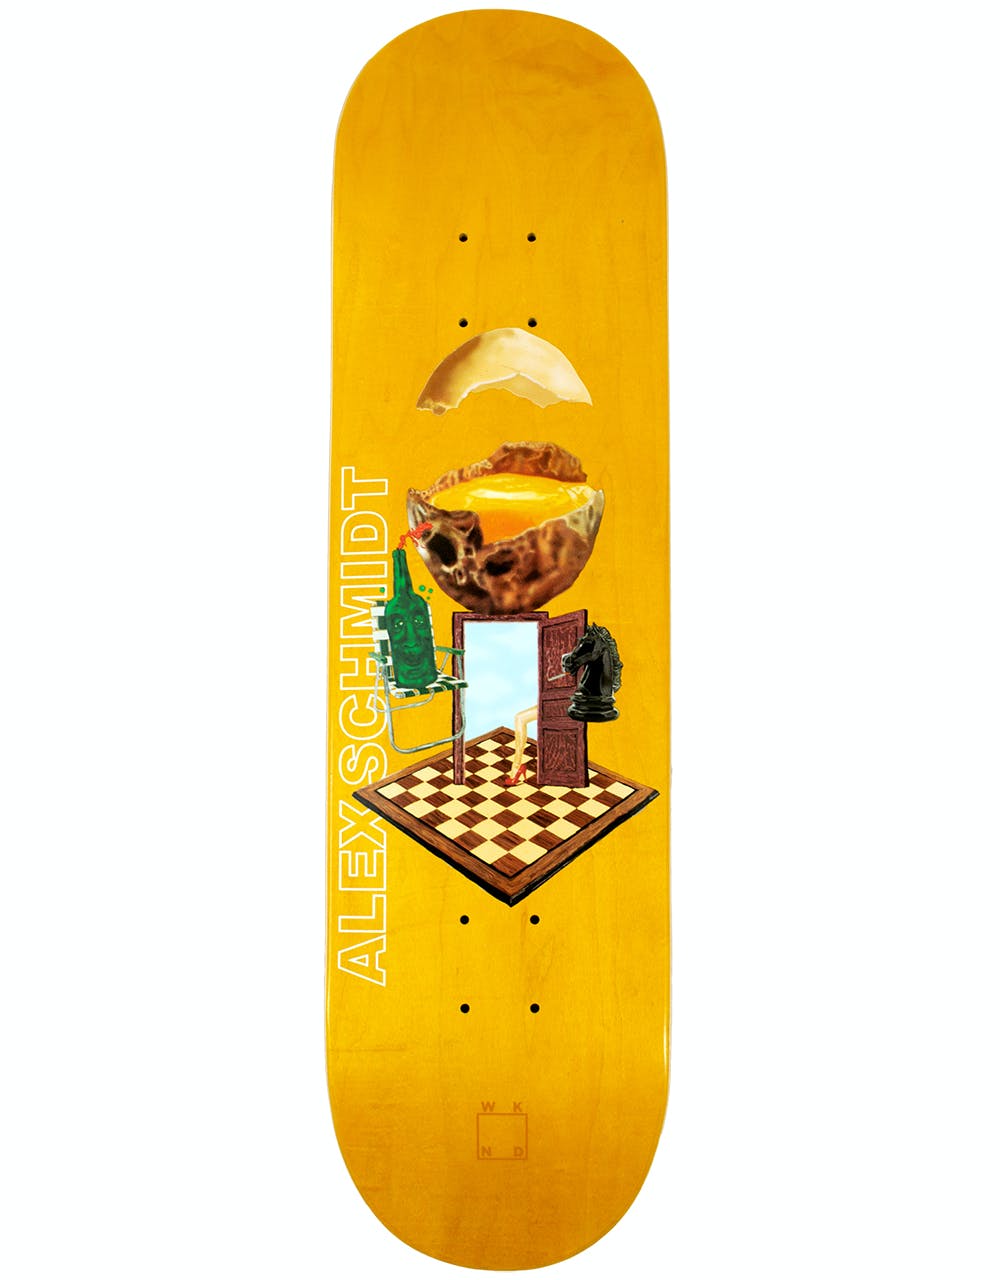 WKND With a Sunny Side of Schmidt Skateboard Deck - 8"